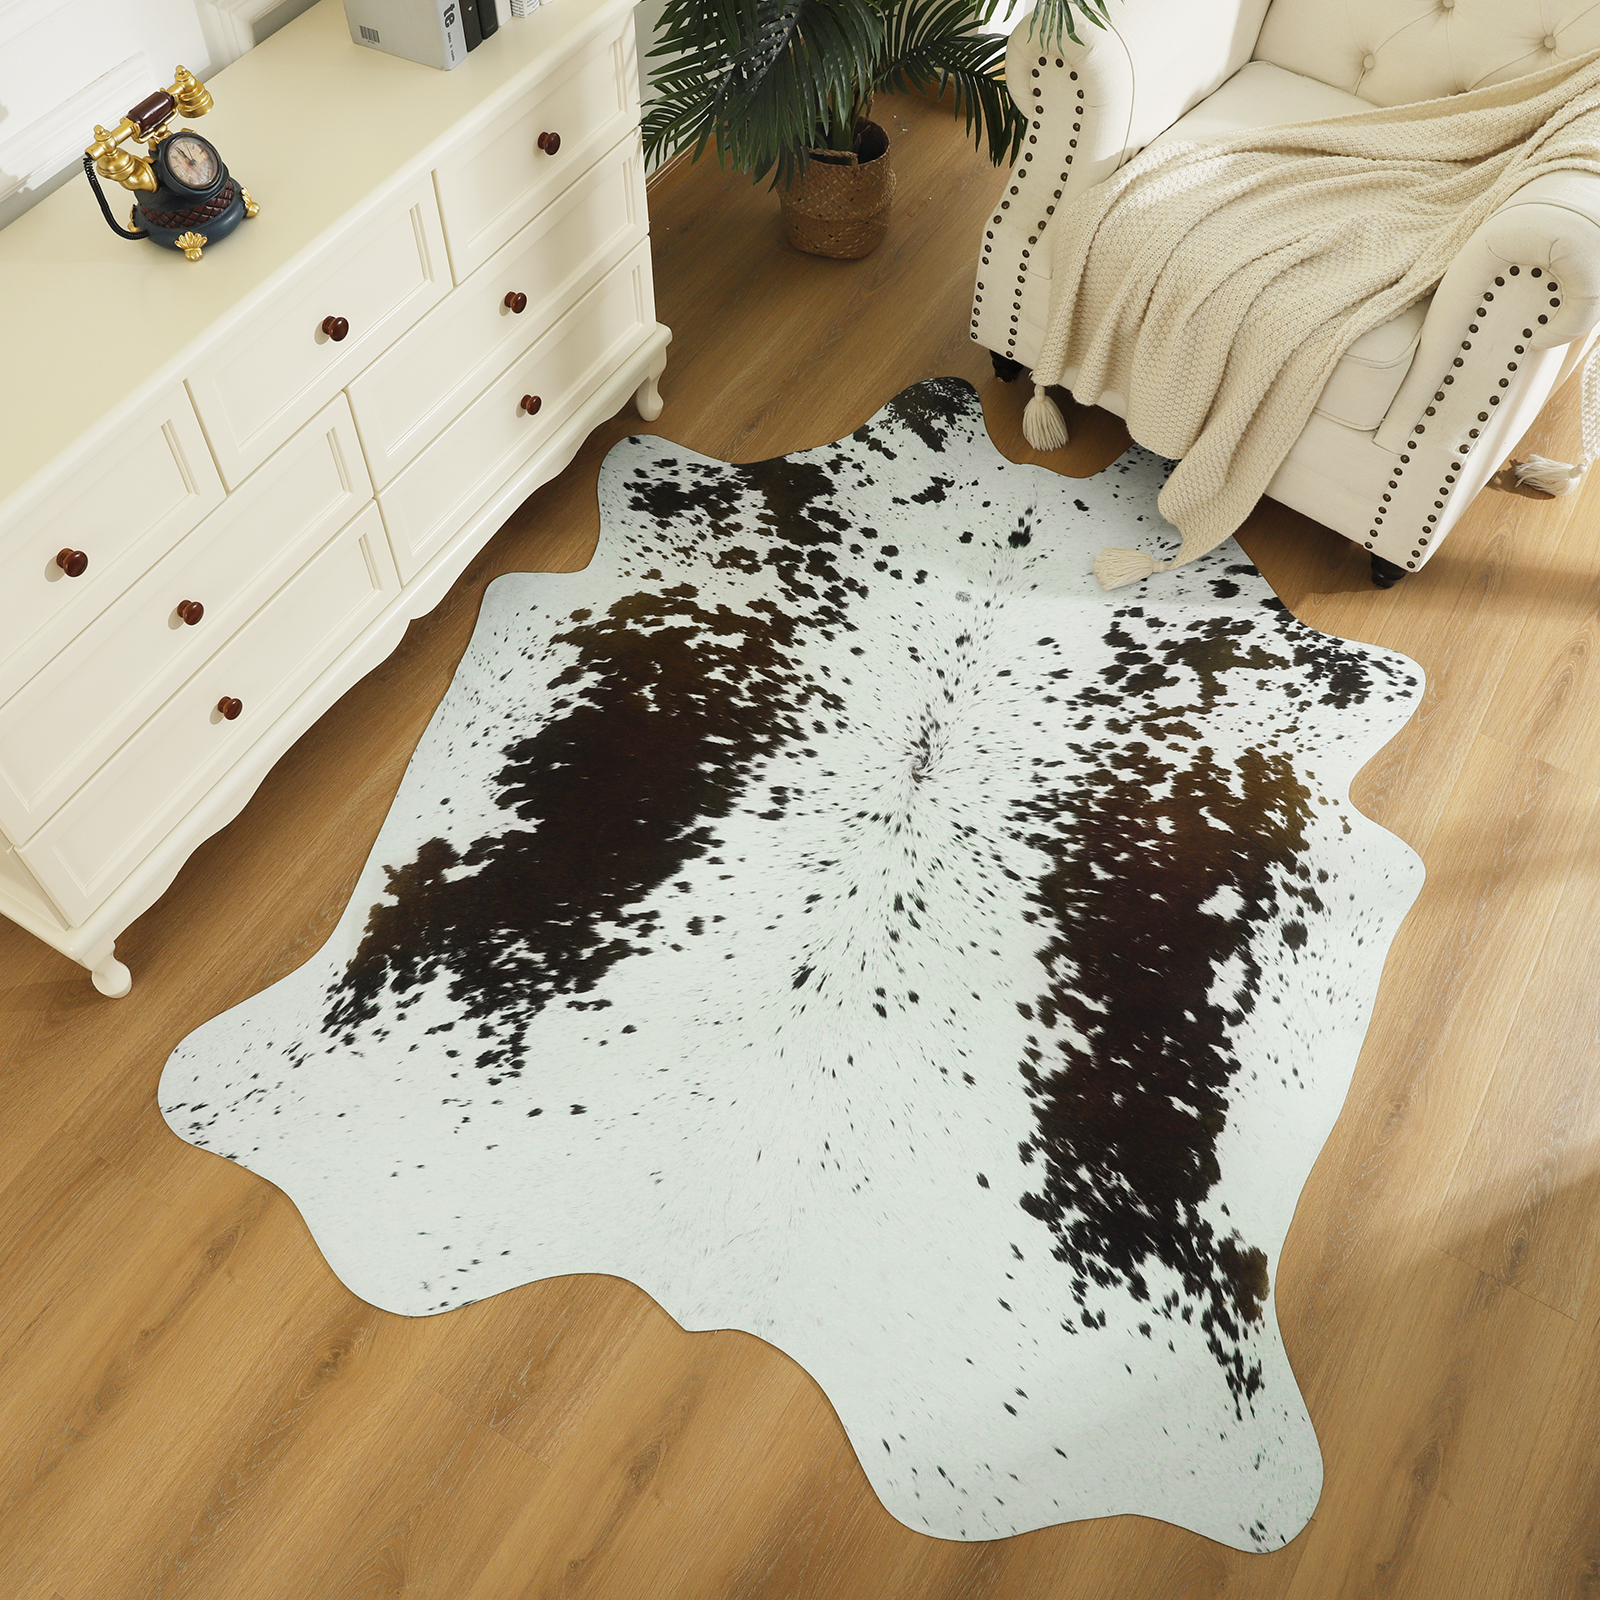 B Benron Luxury Cowhide Rug Retro Cow Hide Vintage Print Large Ultra Thin Faux Rugs For Living Room Non Slip Area Industry Style Hearth Western Decor White